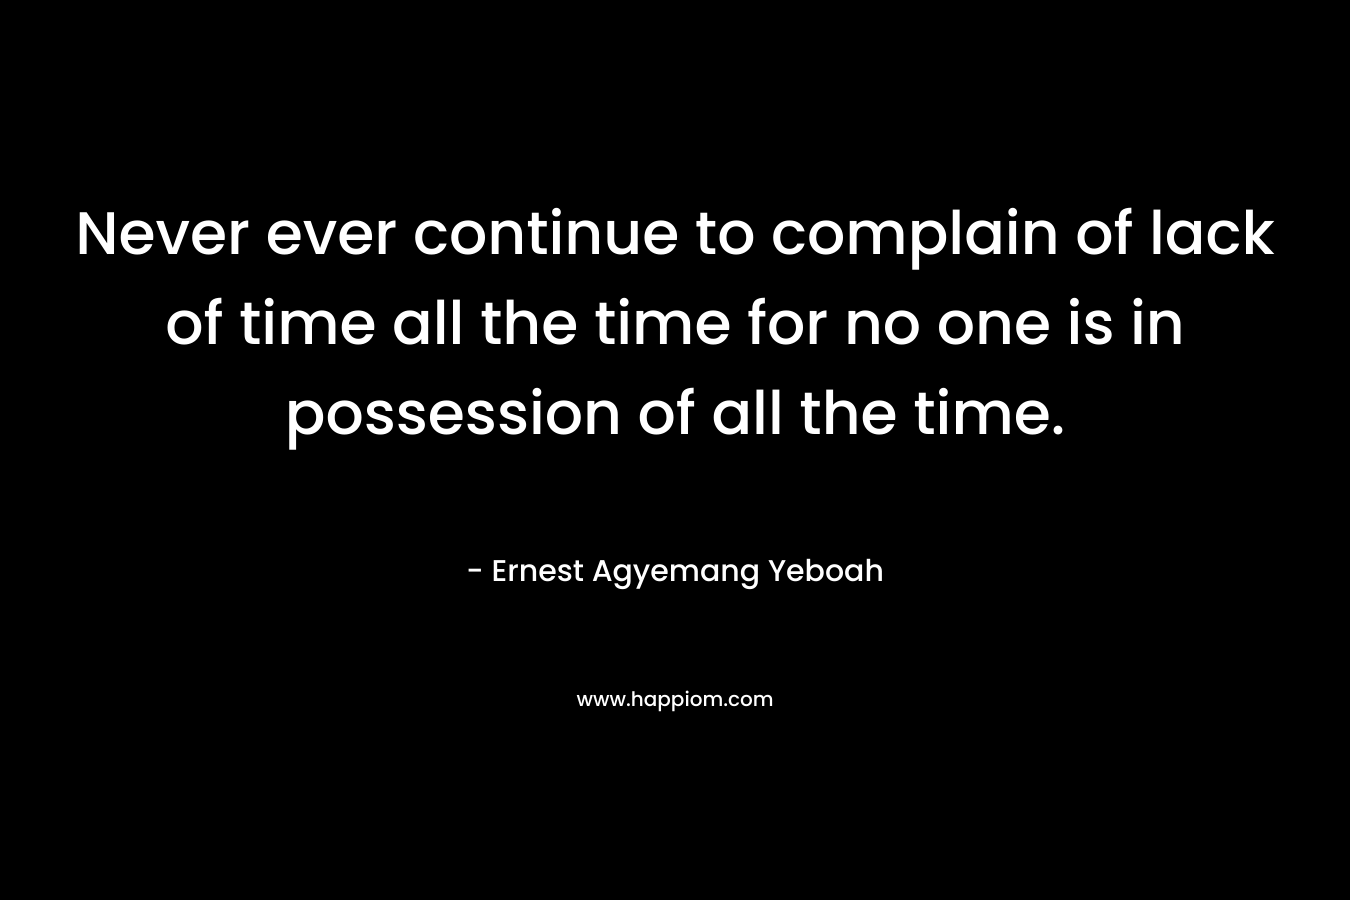 Never ever continue to complain of lack of time all the time for no one is in possession of all the time. – Ernest Agyemang Yeboah